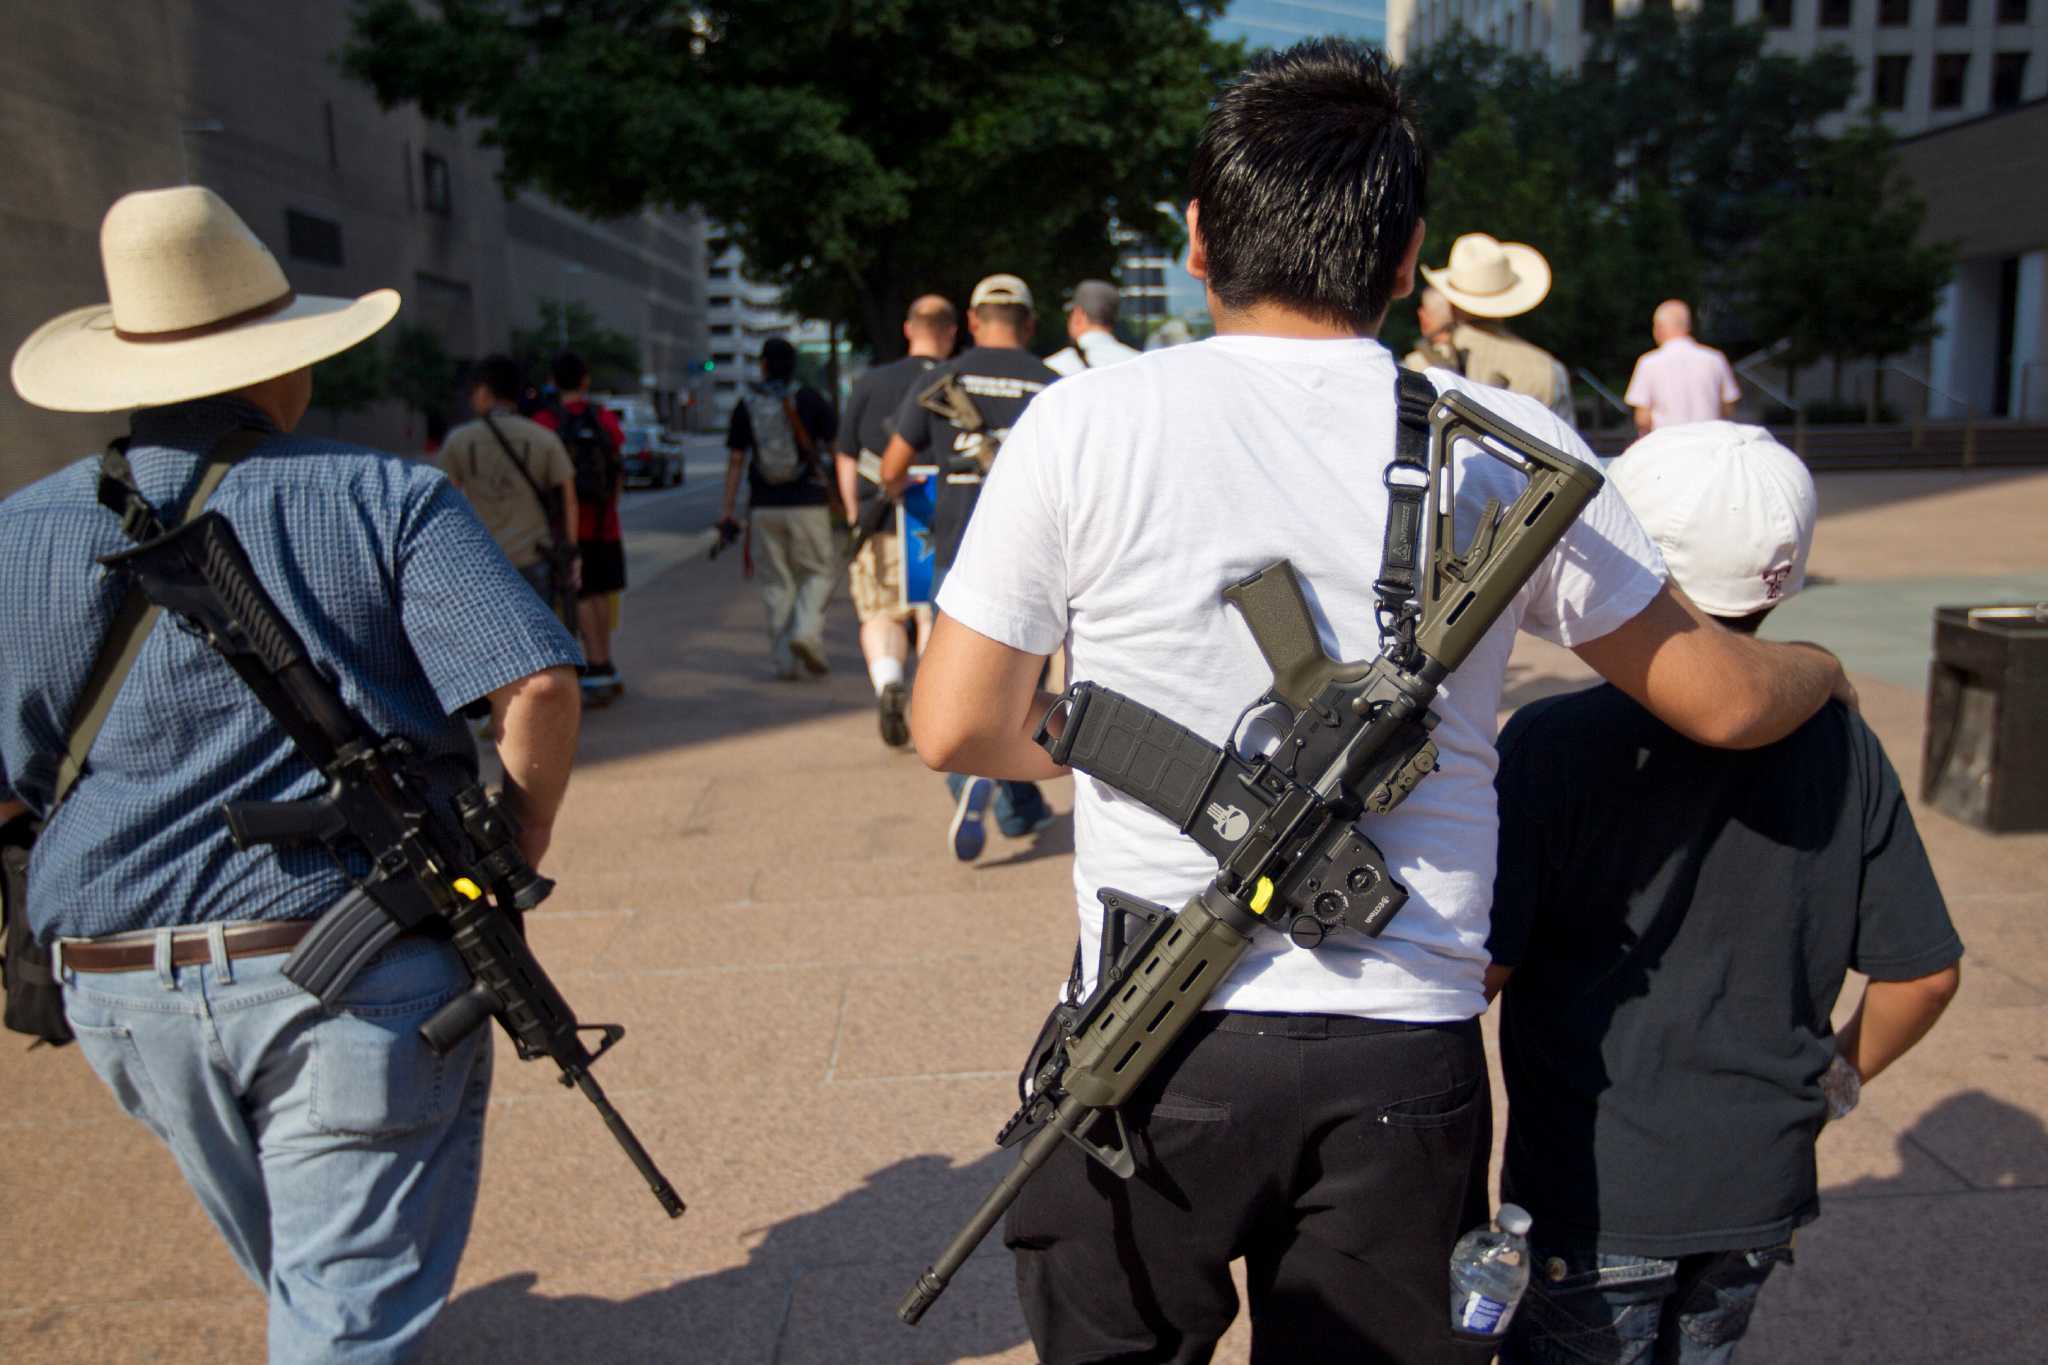 Open carry video seen as threat to lawmakers